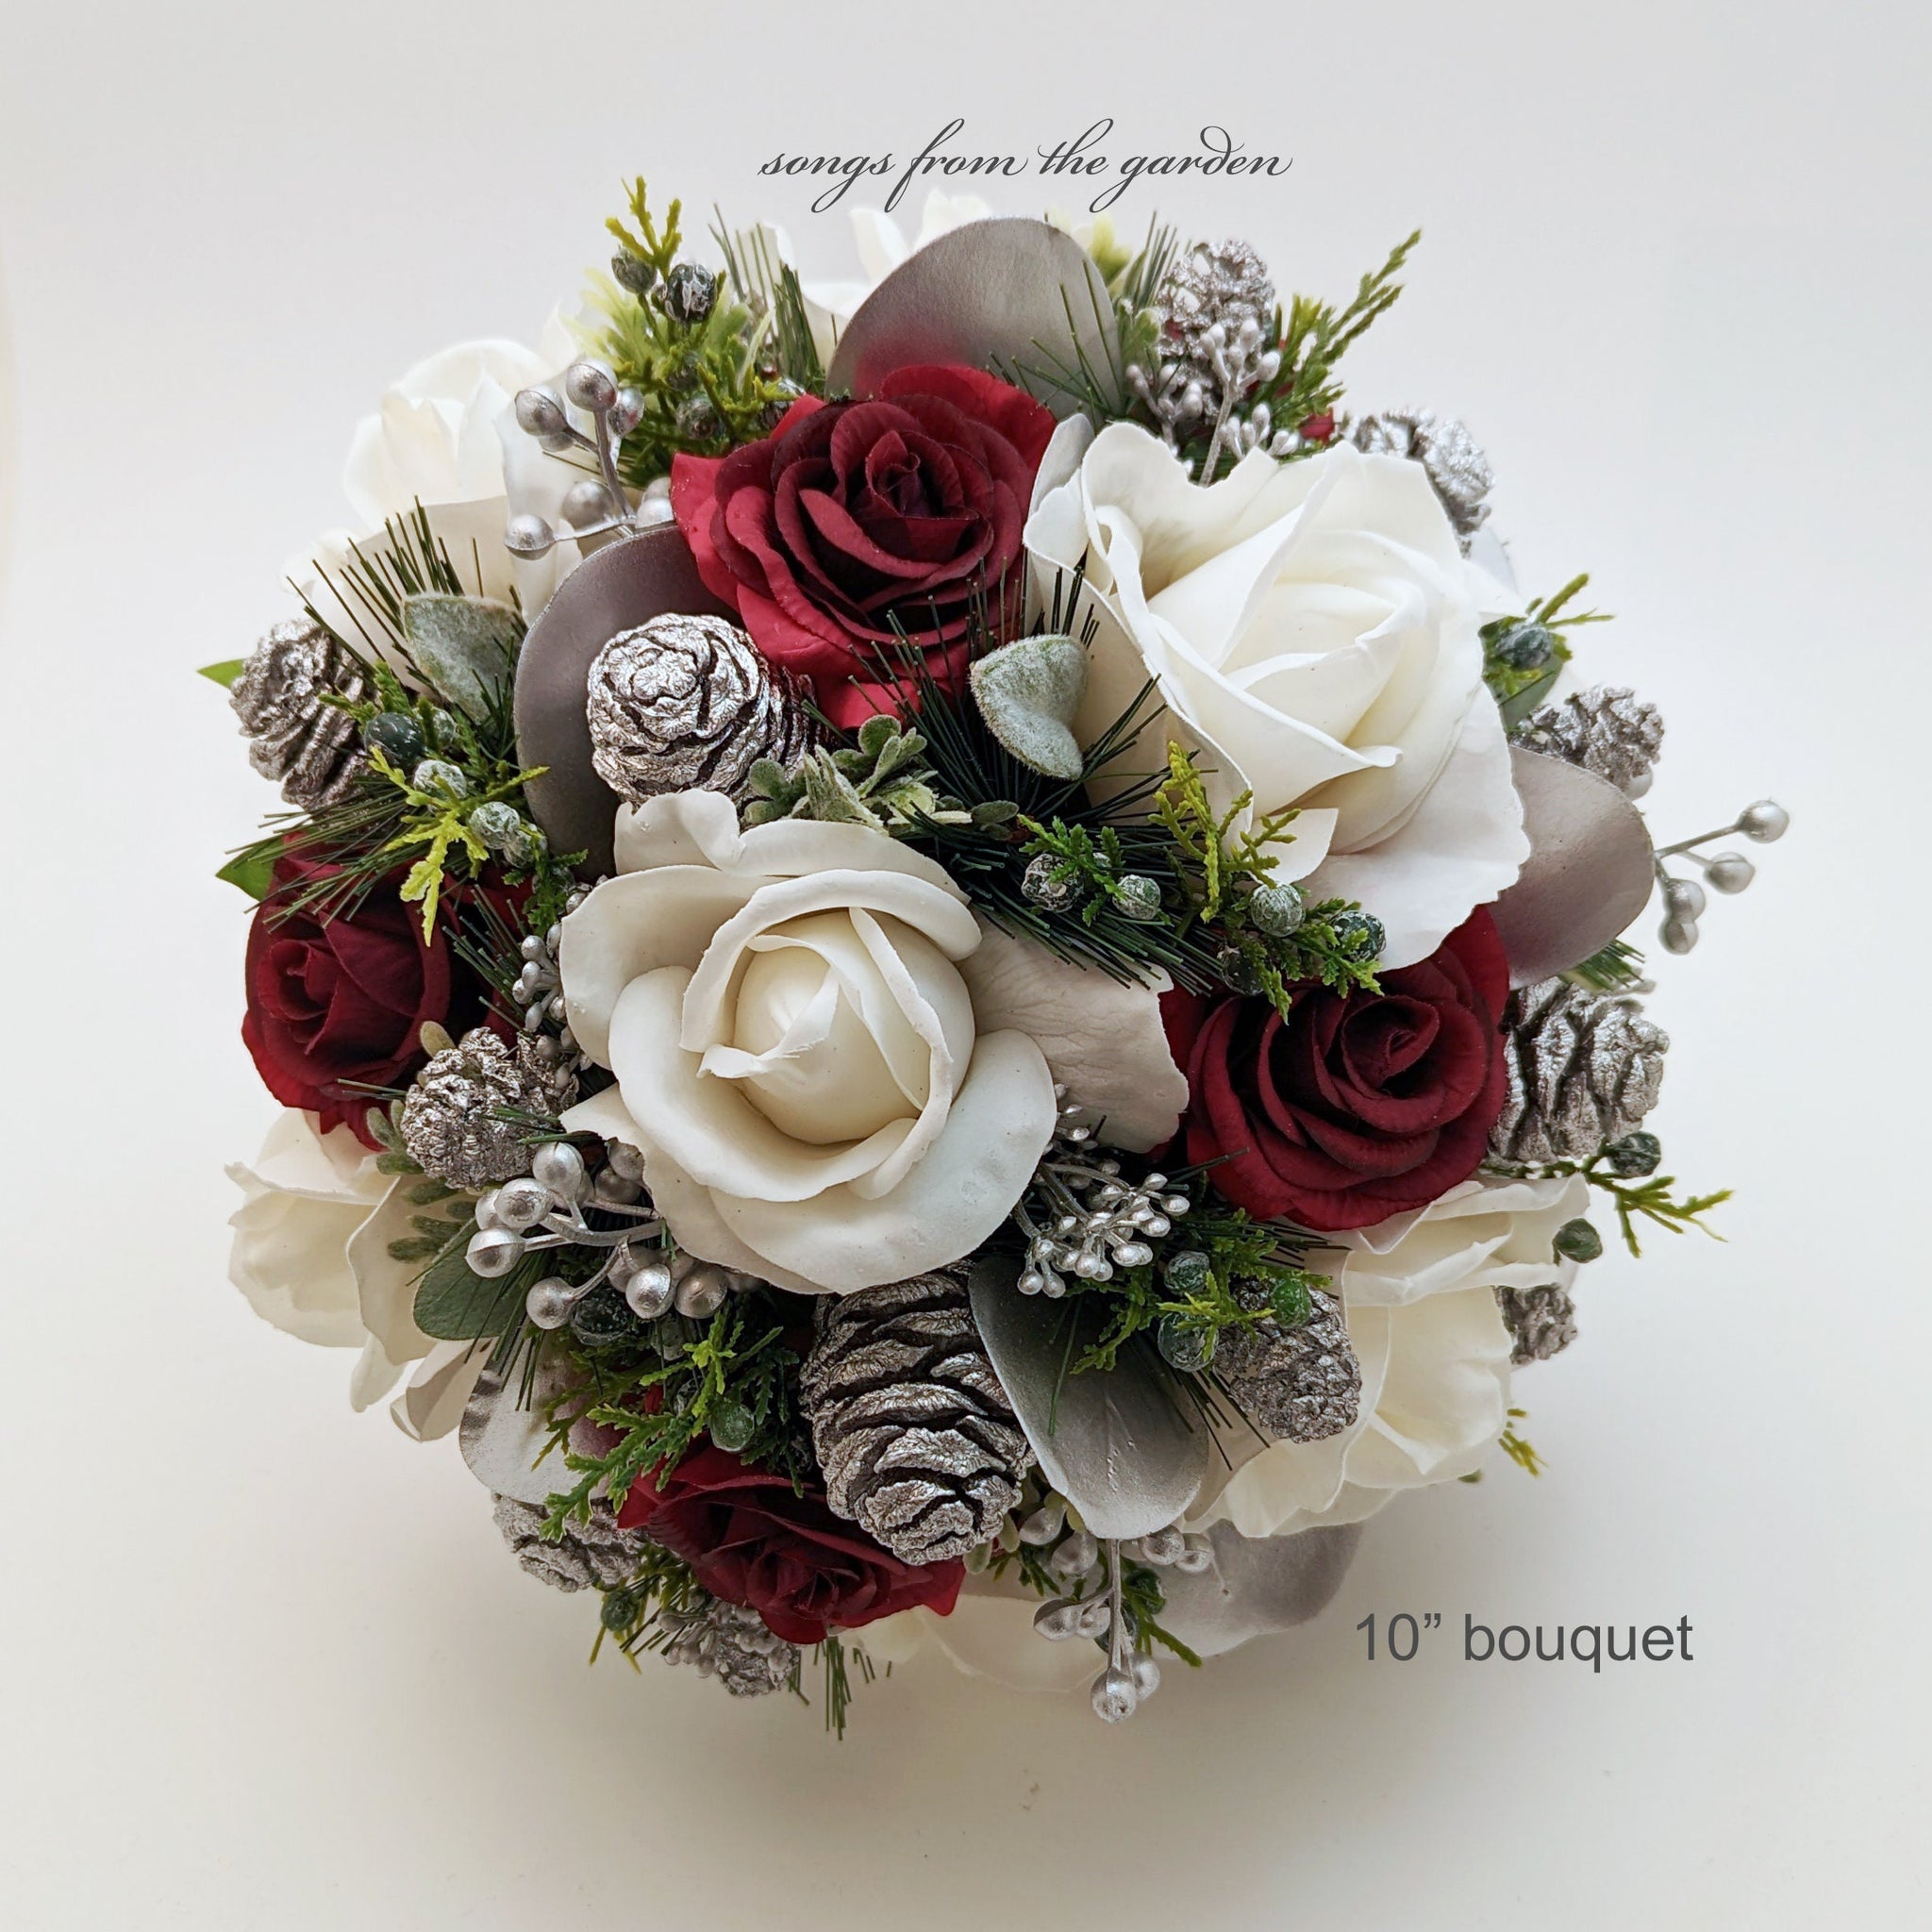 Bridal Bouquet Evergreens Burgundy Silver & White Bouquet Pine Cones Real Touch Roses - add a Groom's Boutonniere Bridesmaids Bouquet More!